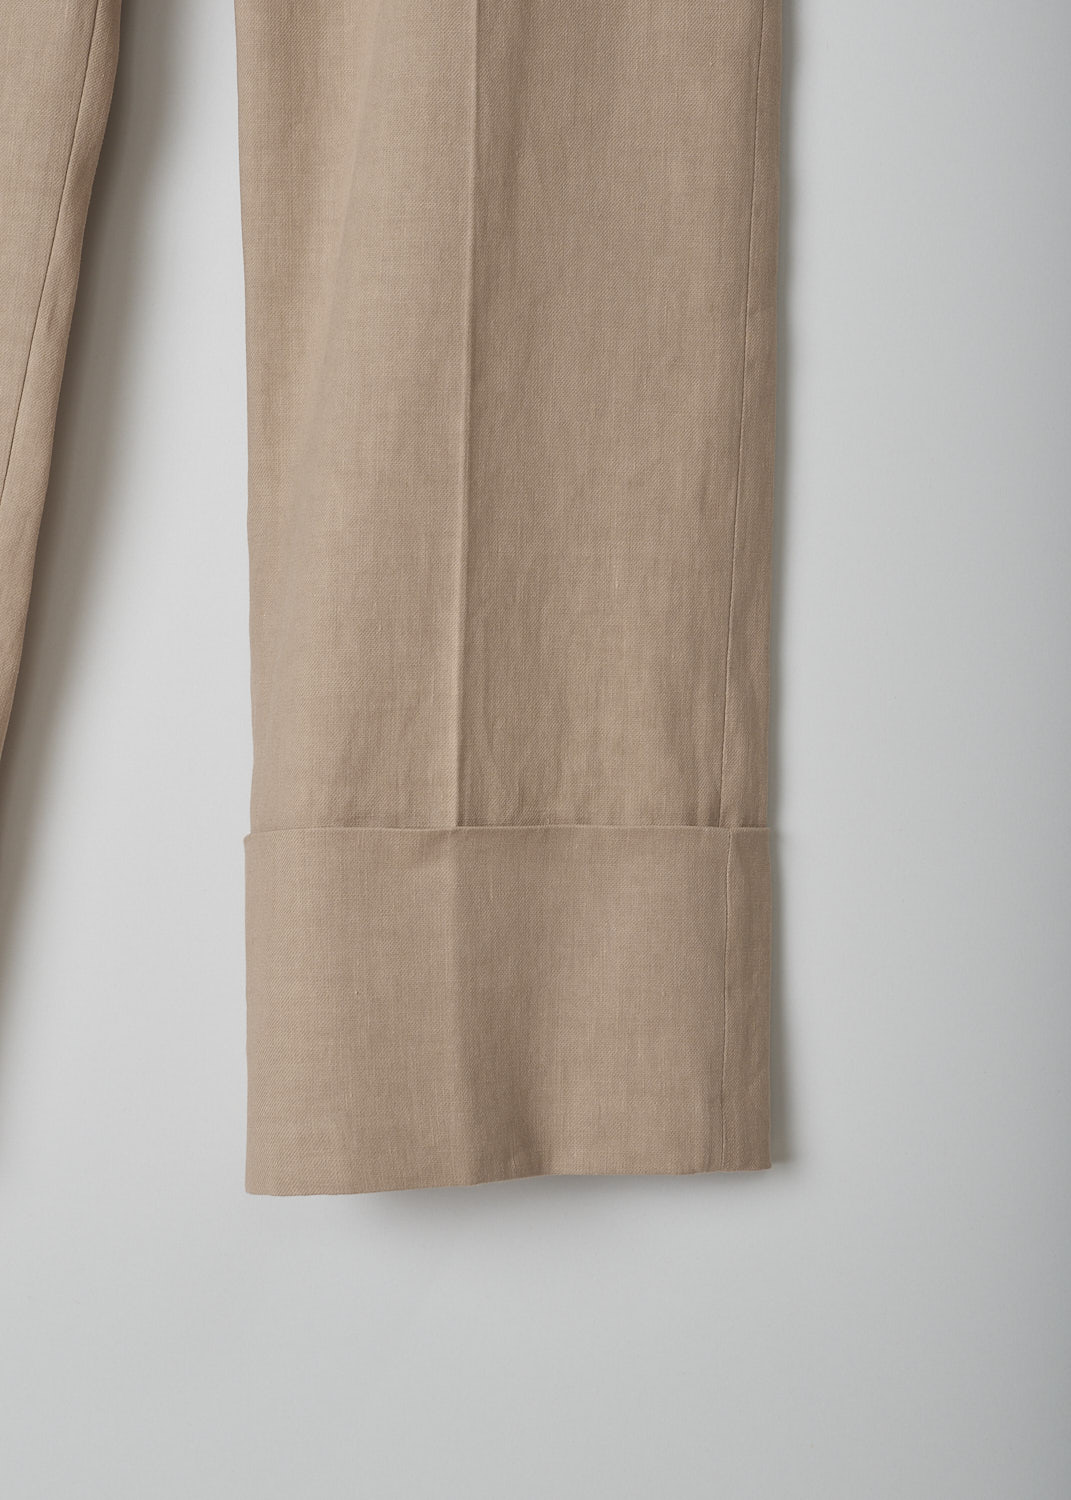 BRUNELLO CUCINELLI, DUSKY PINK LINEN-BLEND PANTS, MF591P7231_C7914, Pink, Detail, These dusky pink linen-blend pants have a waistband with belt loops and a concealed clasp and zip closure. The pants have tapered pant legs with pressed centre creases and a broad folded hem. These pants have slanted pockets in the front and welt pockets in the back.
